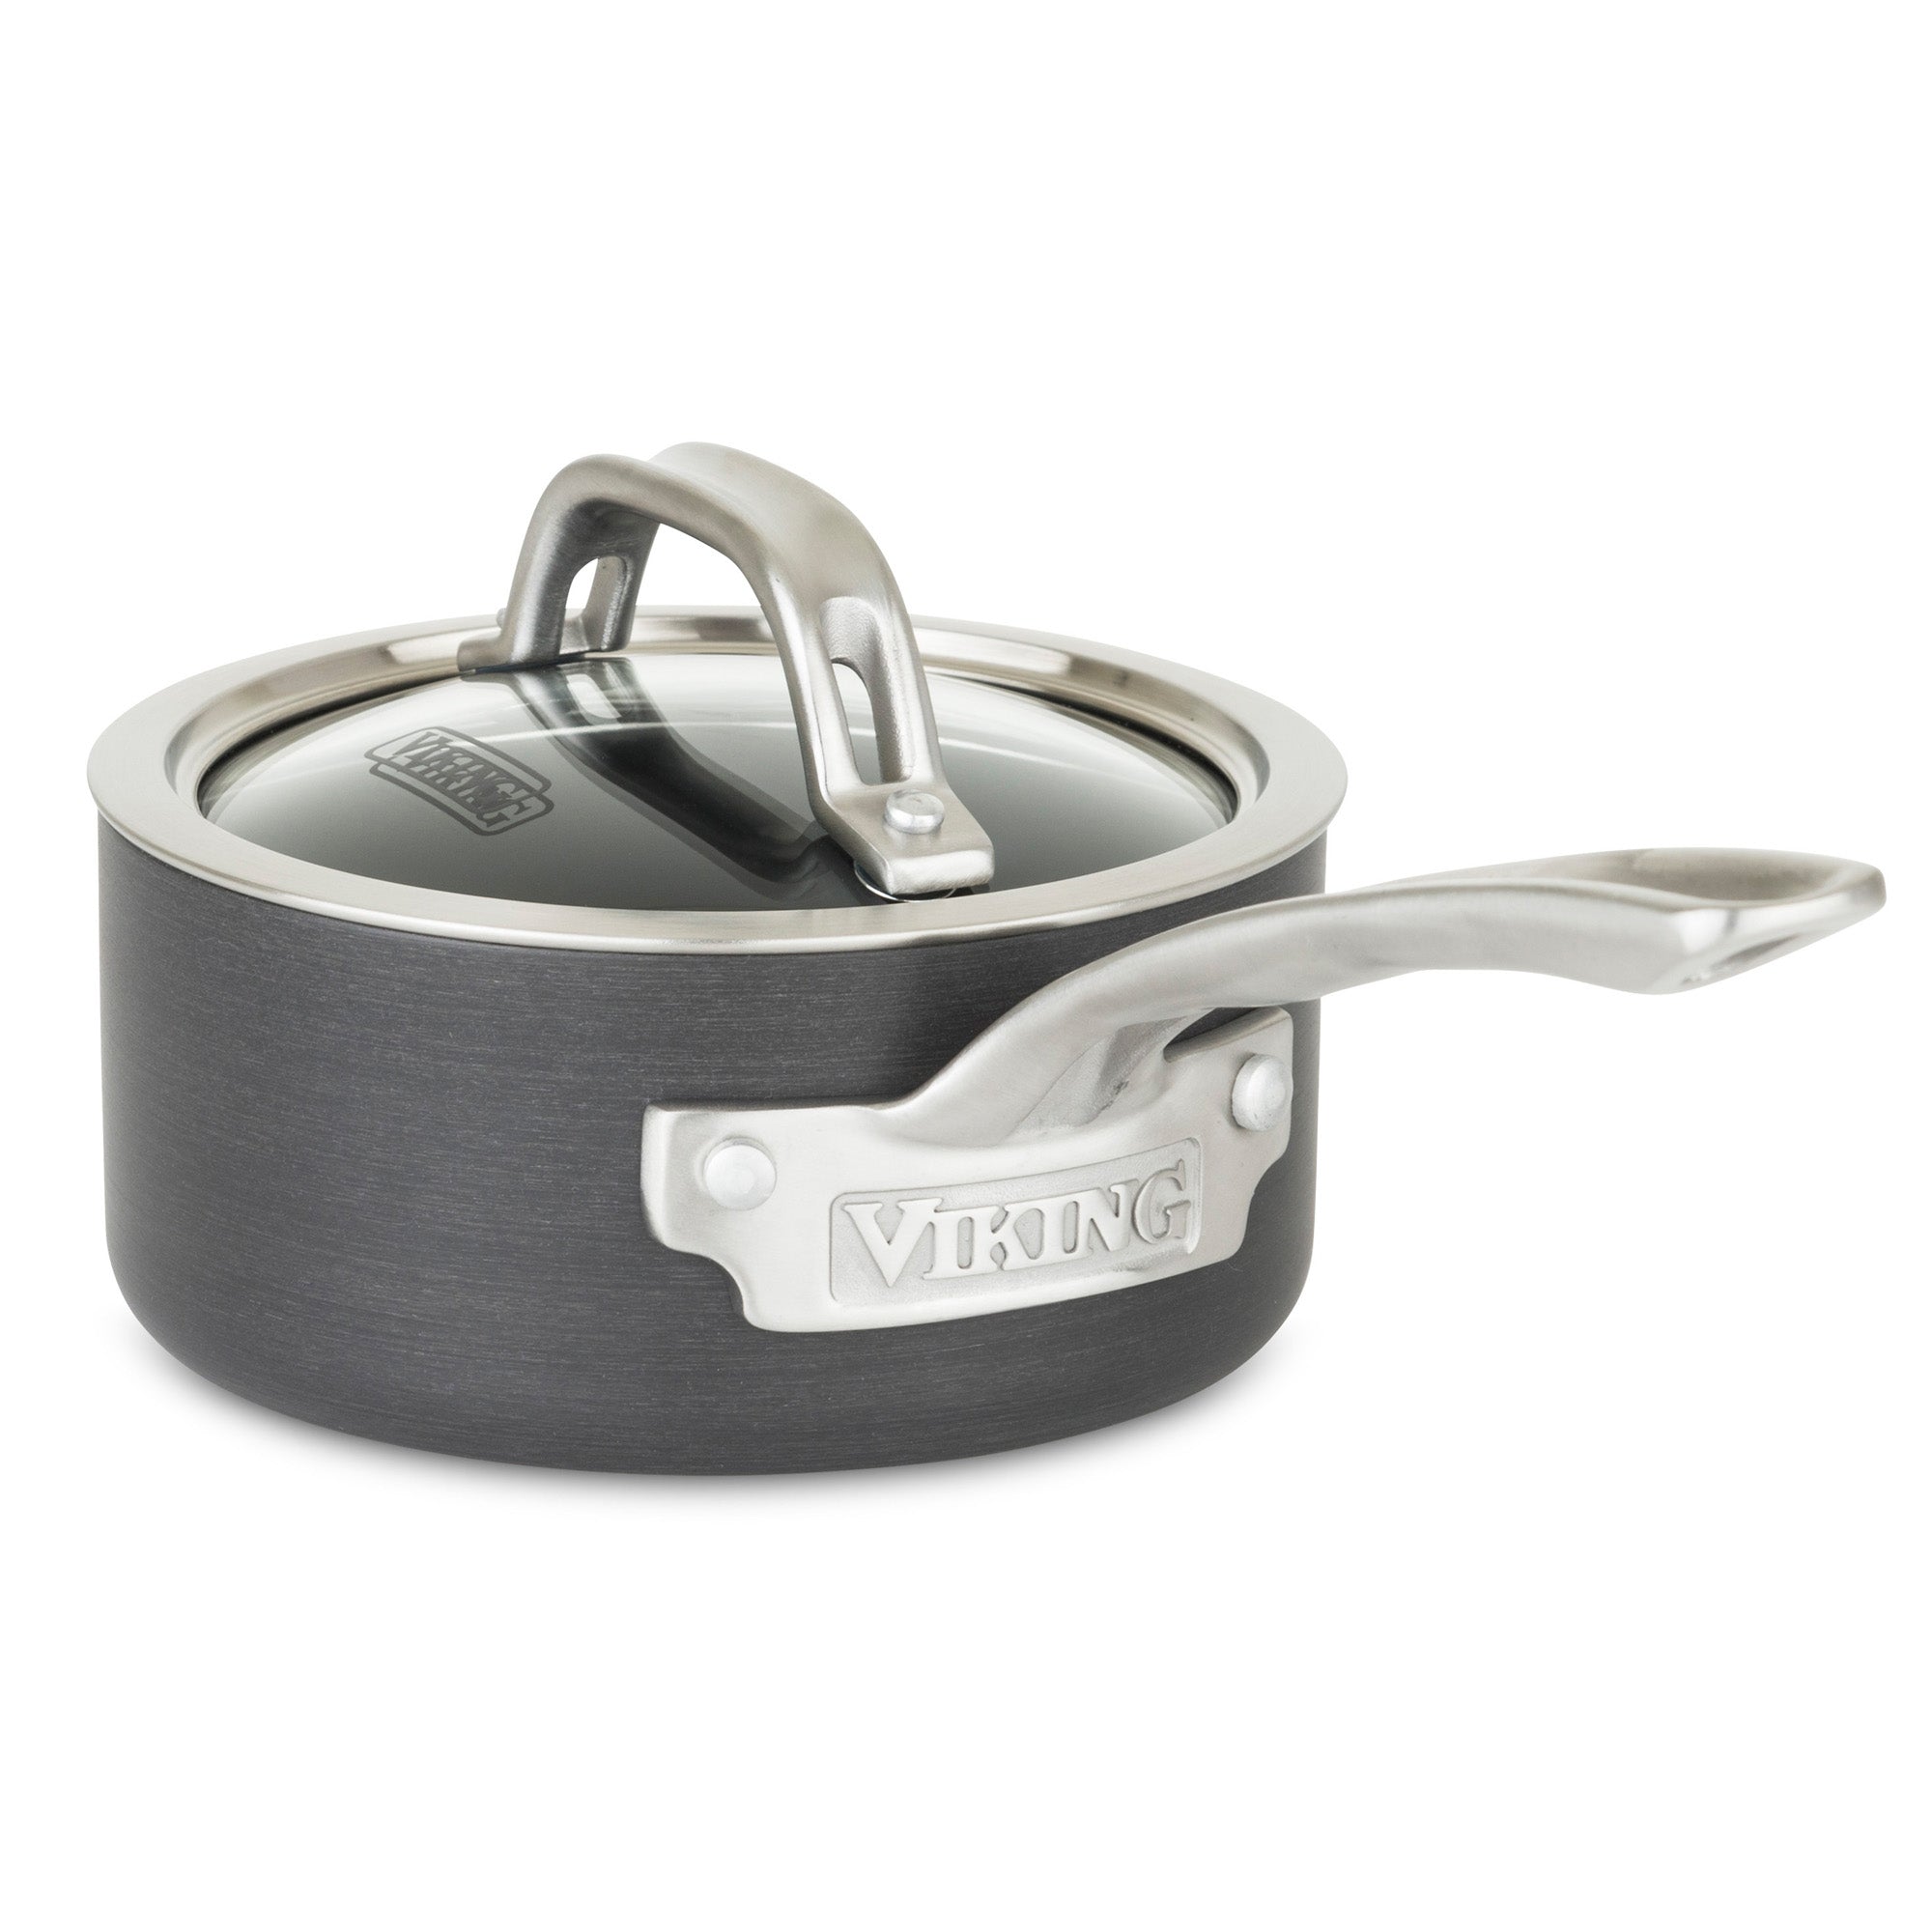 Viking Hard Anodized Nonstick 1-Quart Sauce Pan with Glass Lid